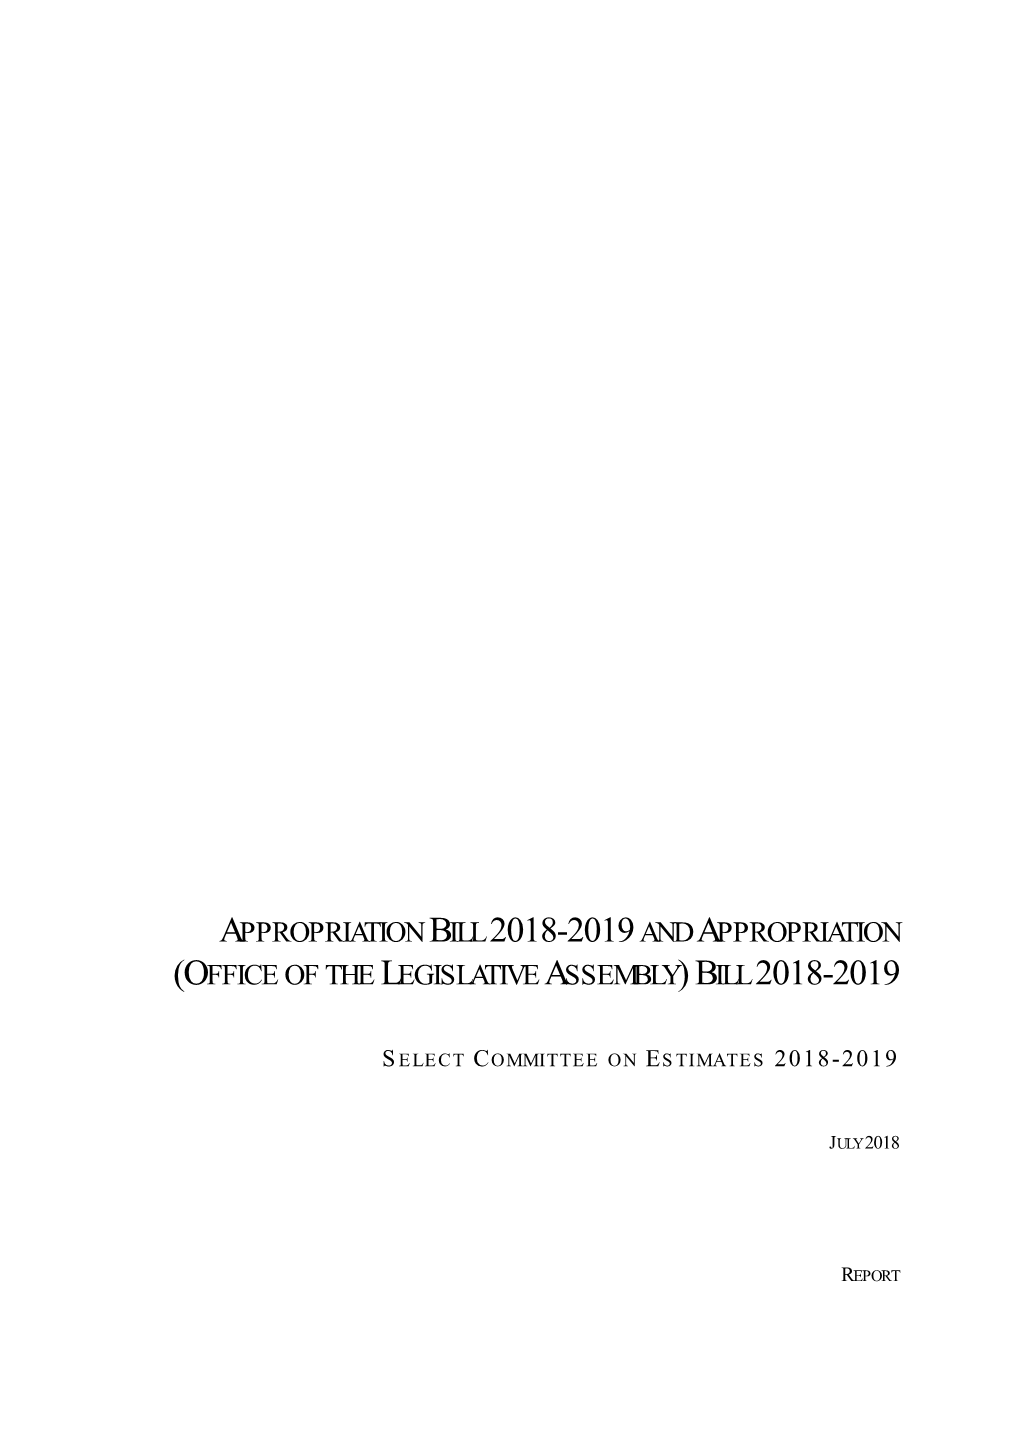 Report on Select Committee on Estimates 2018-2019